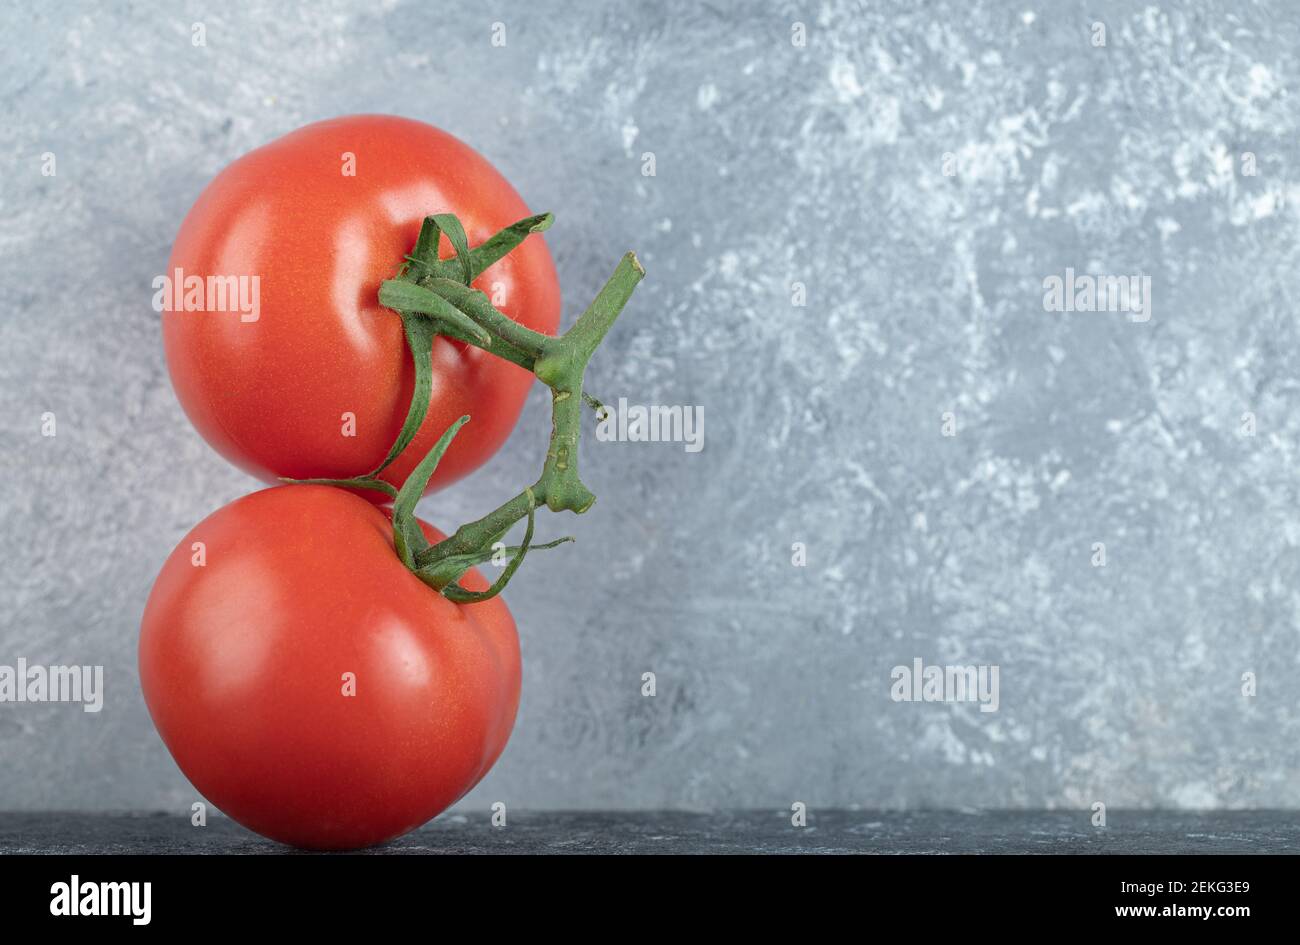 Two whole fresh juicy tomatoes on a gray background Stock Photo